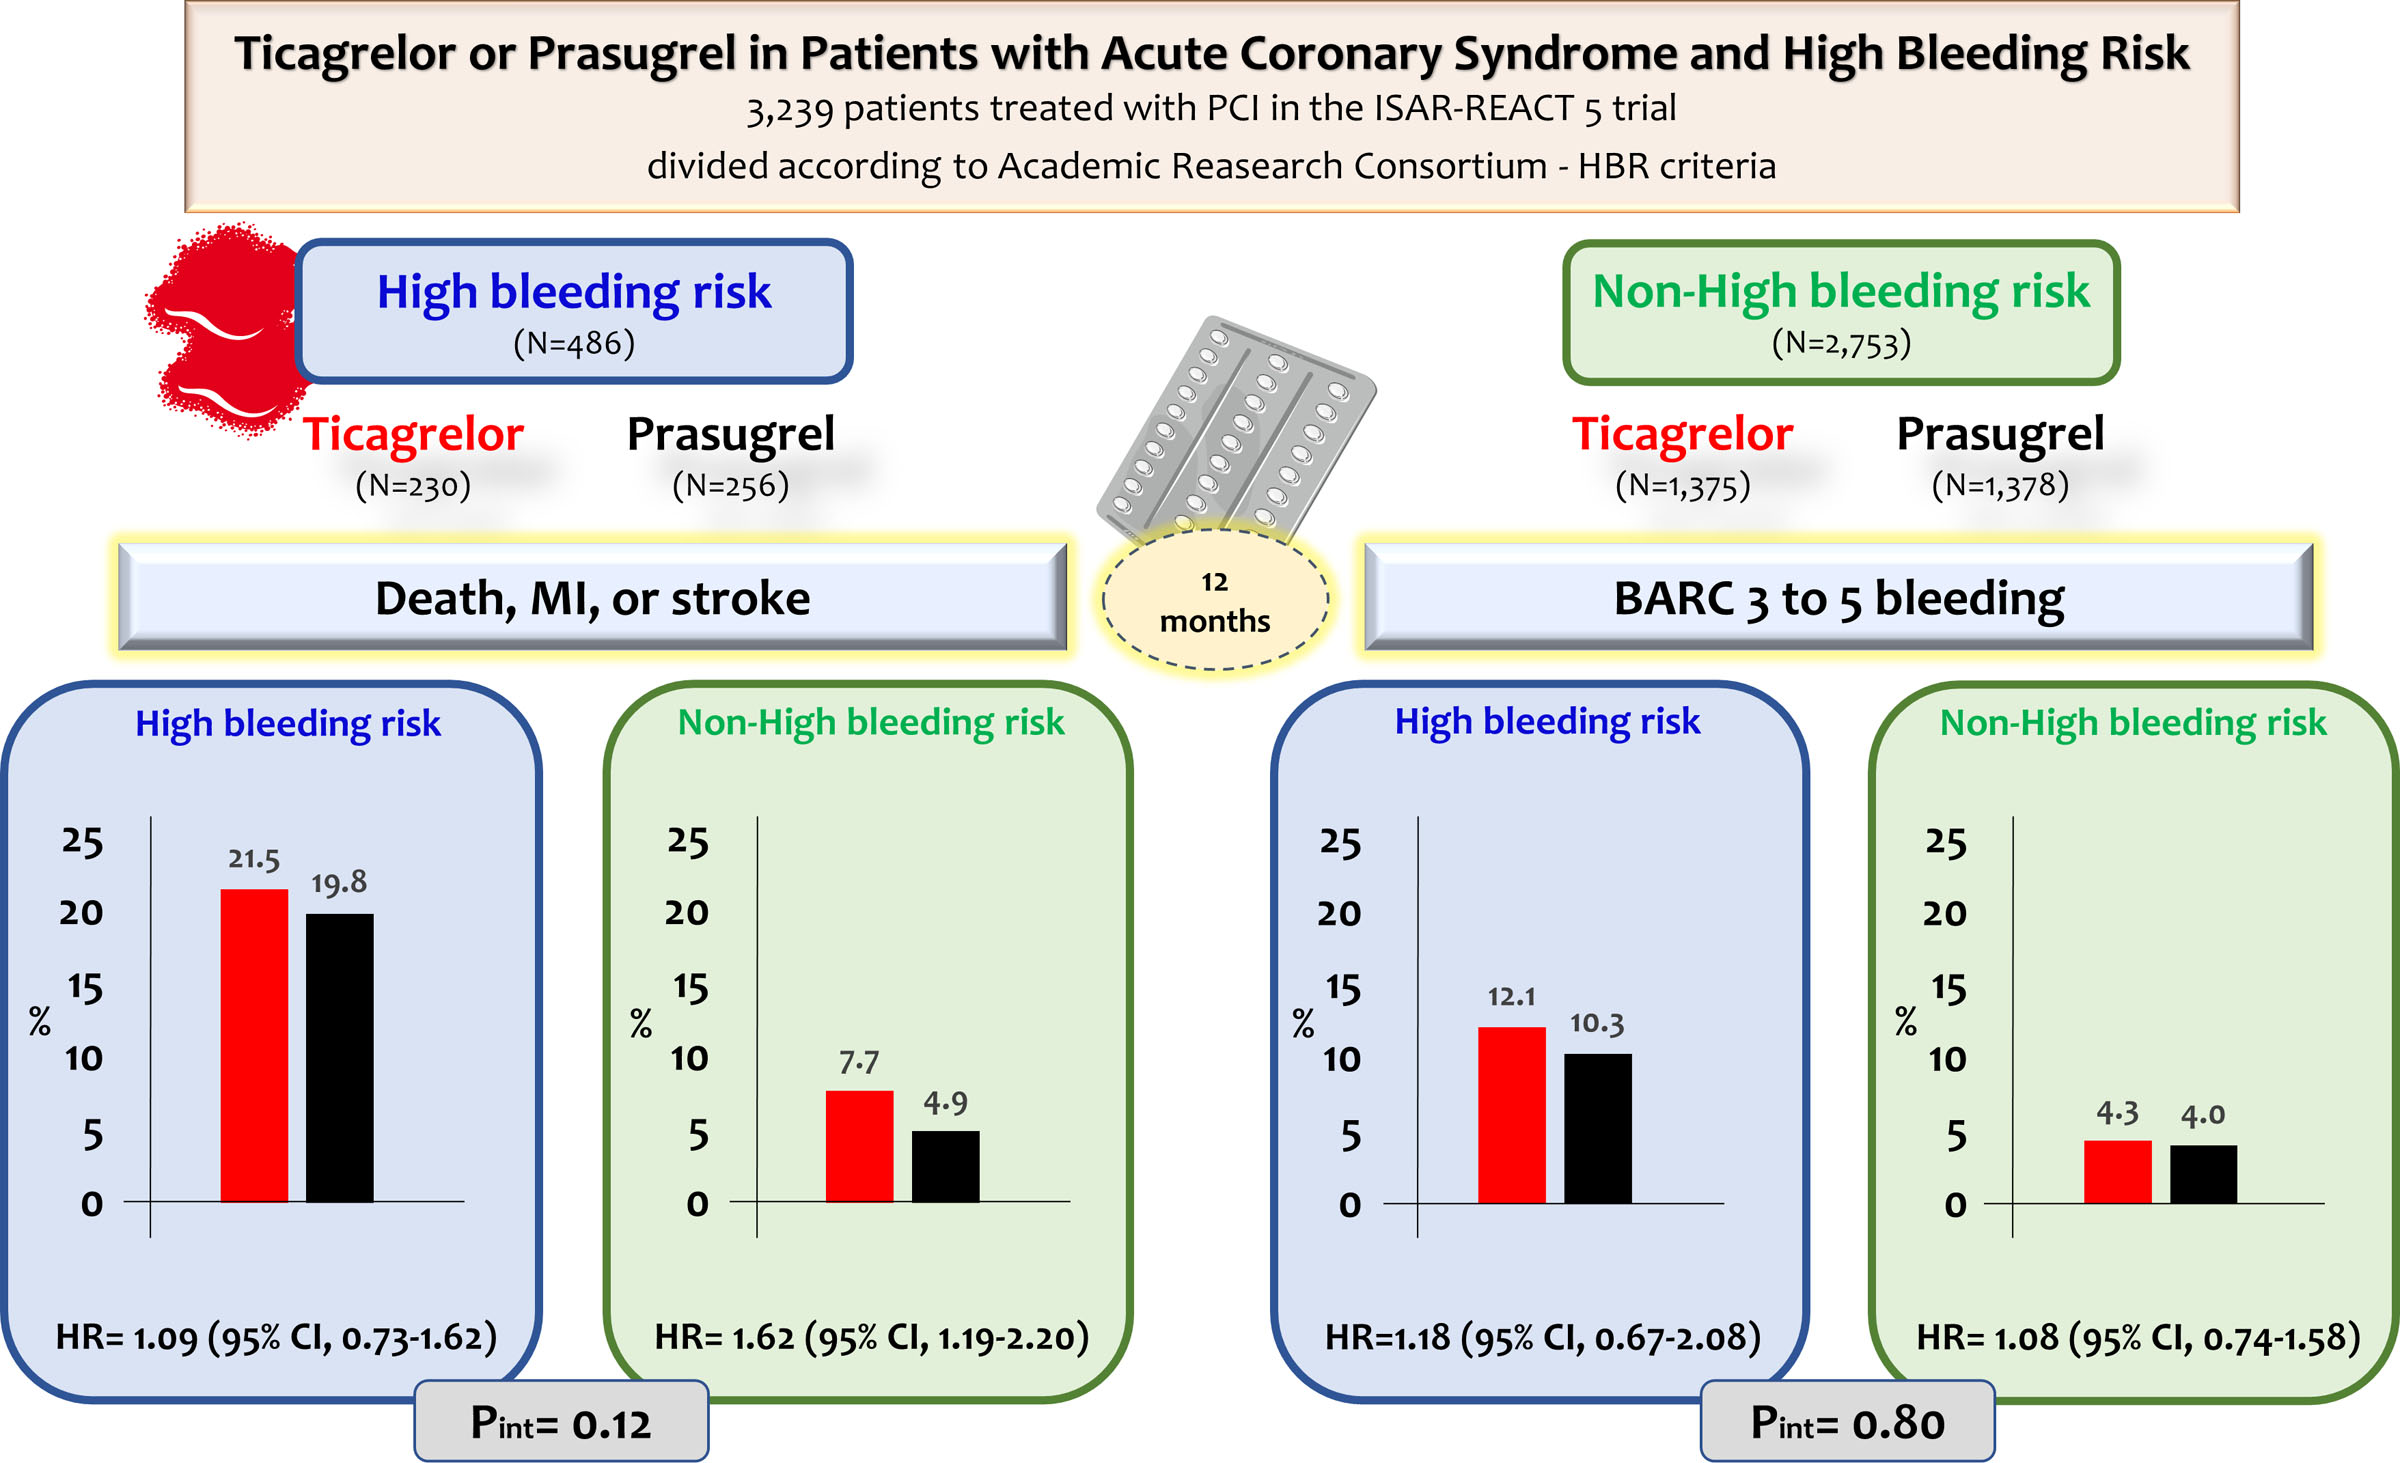 Ticagrelor or Prasugrel in Patients With Acute Coronary Syndrome and High Bleeding Risk